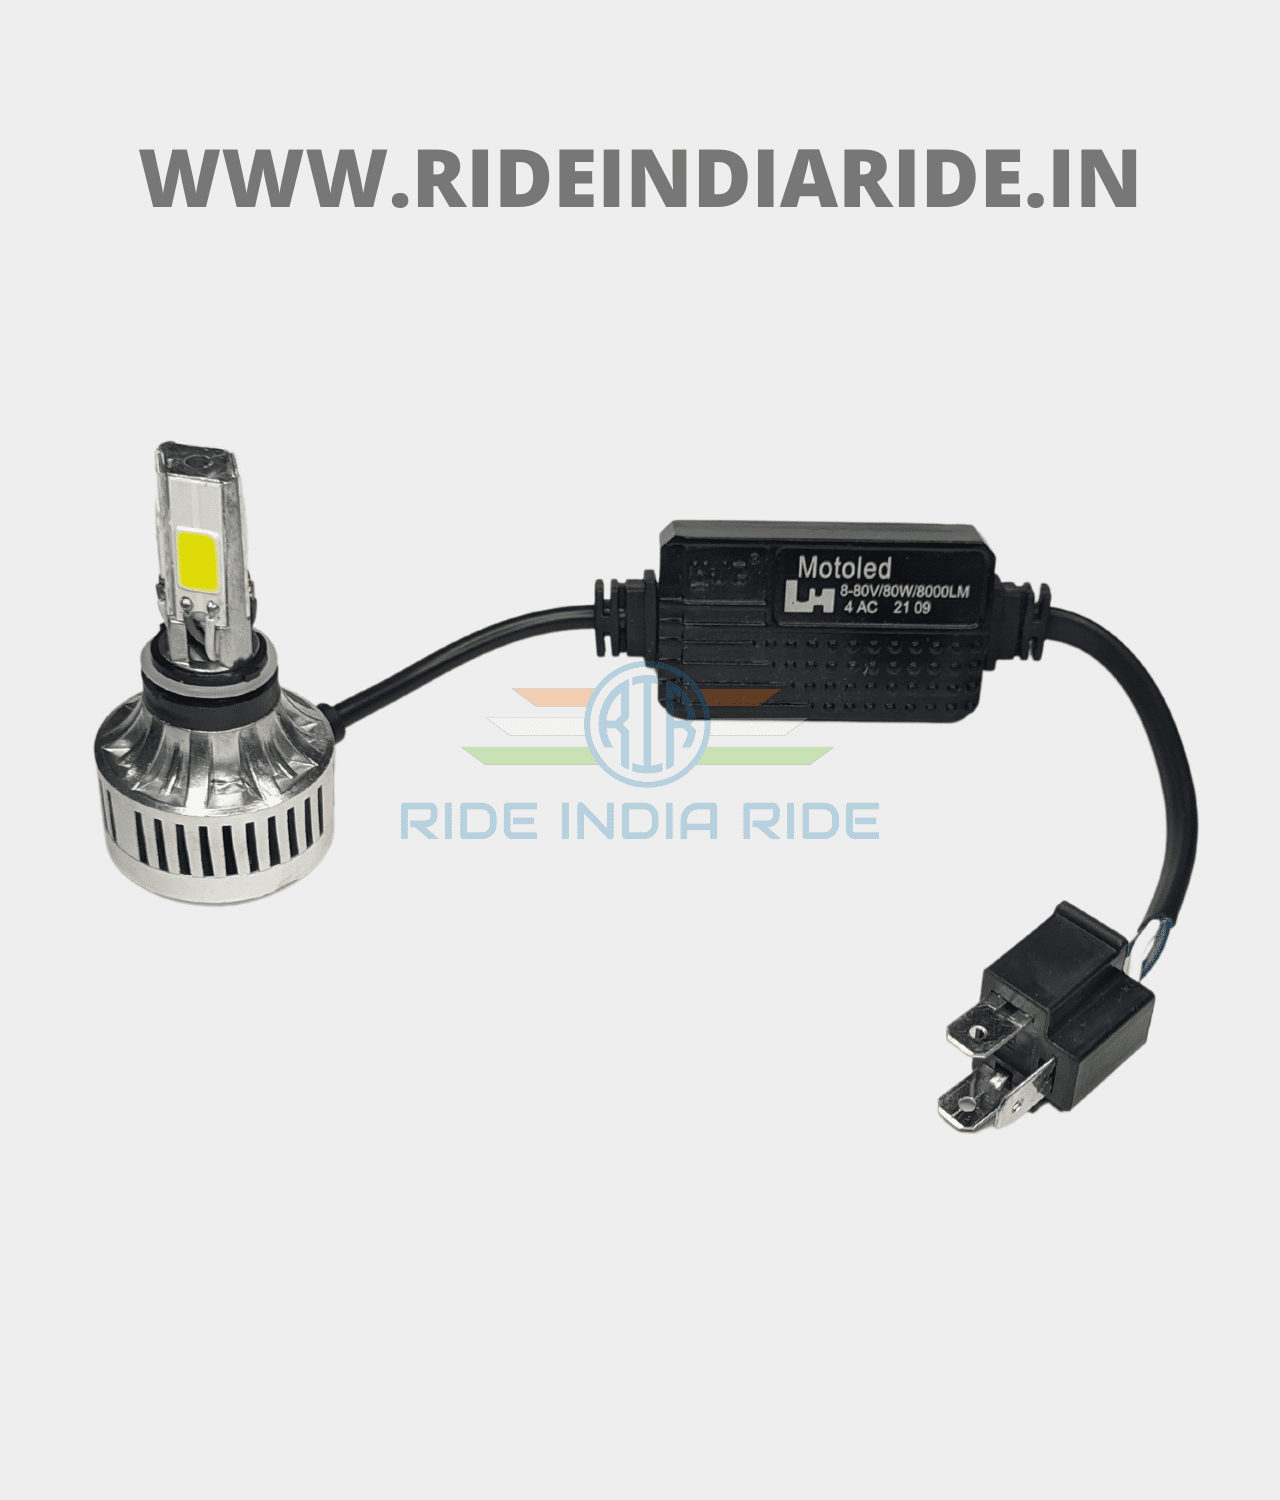 HJG LED Headlight Bulb H4 80W 8000lm For All Motorcycles